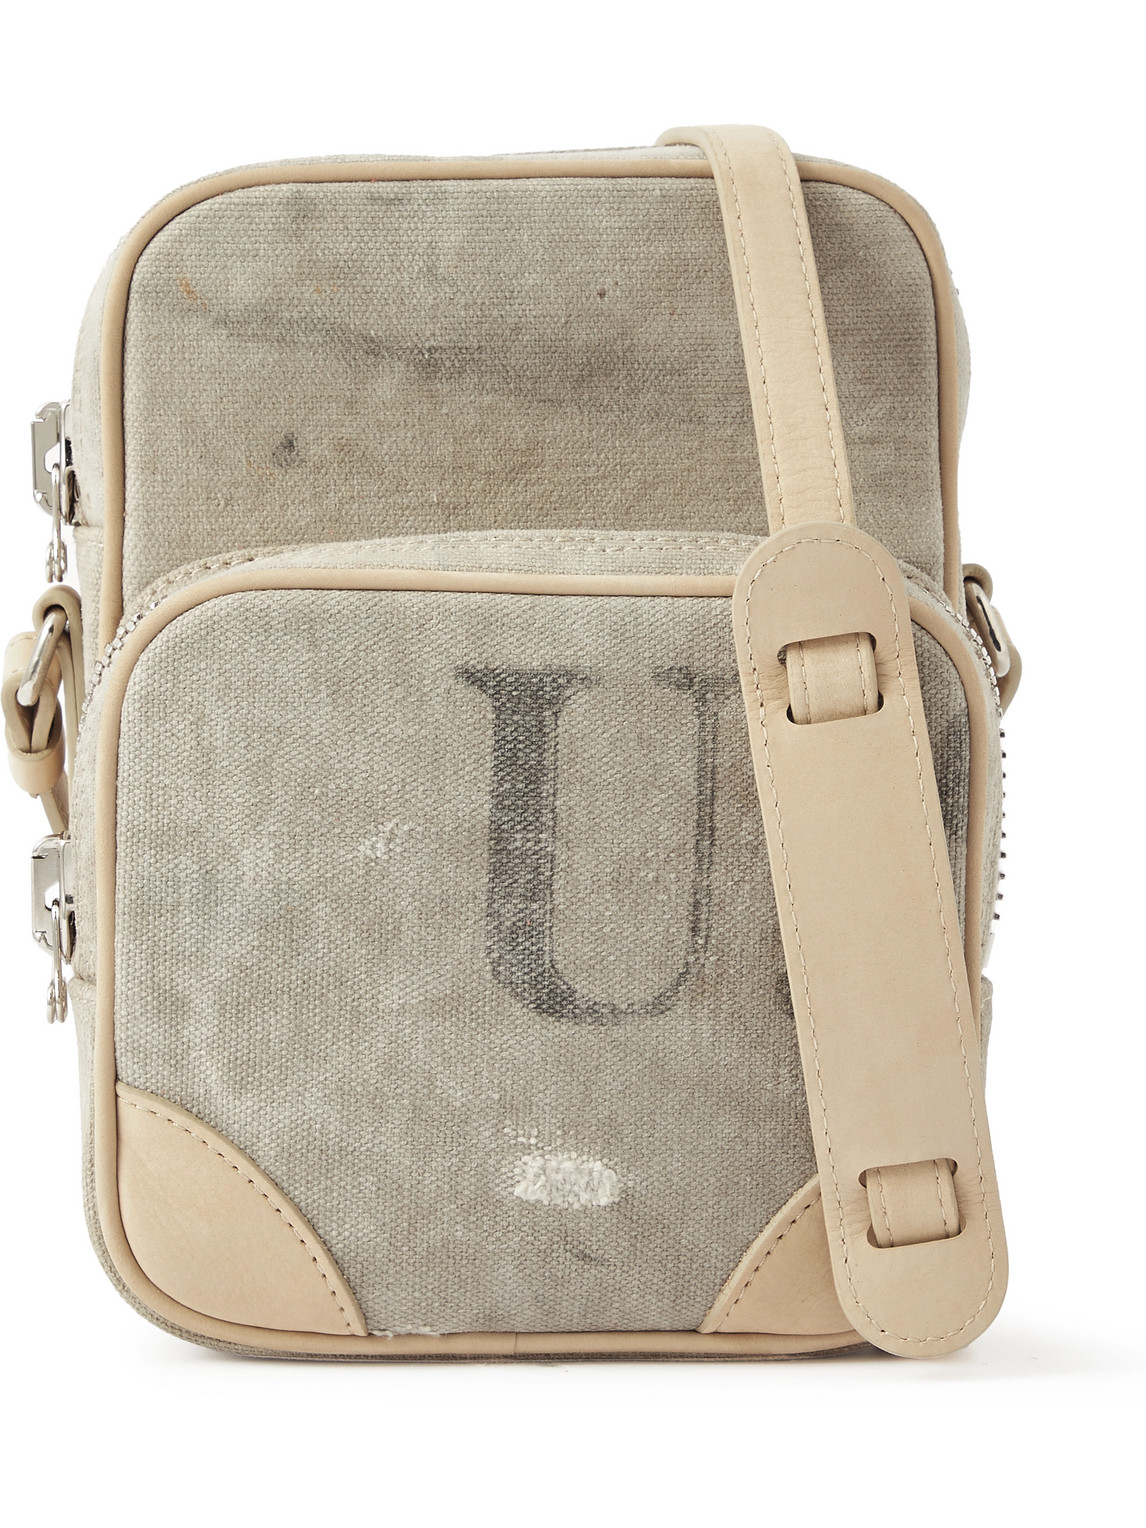 READYMADE Suede-Trimmed Distressed Canvas Messenger Bag